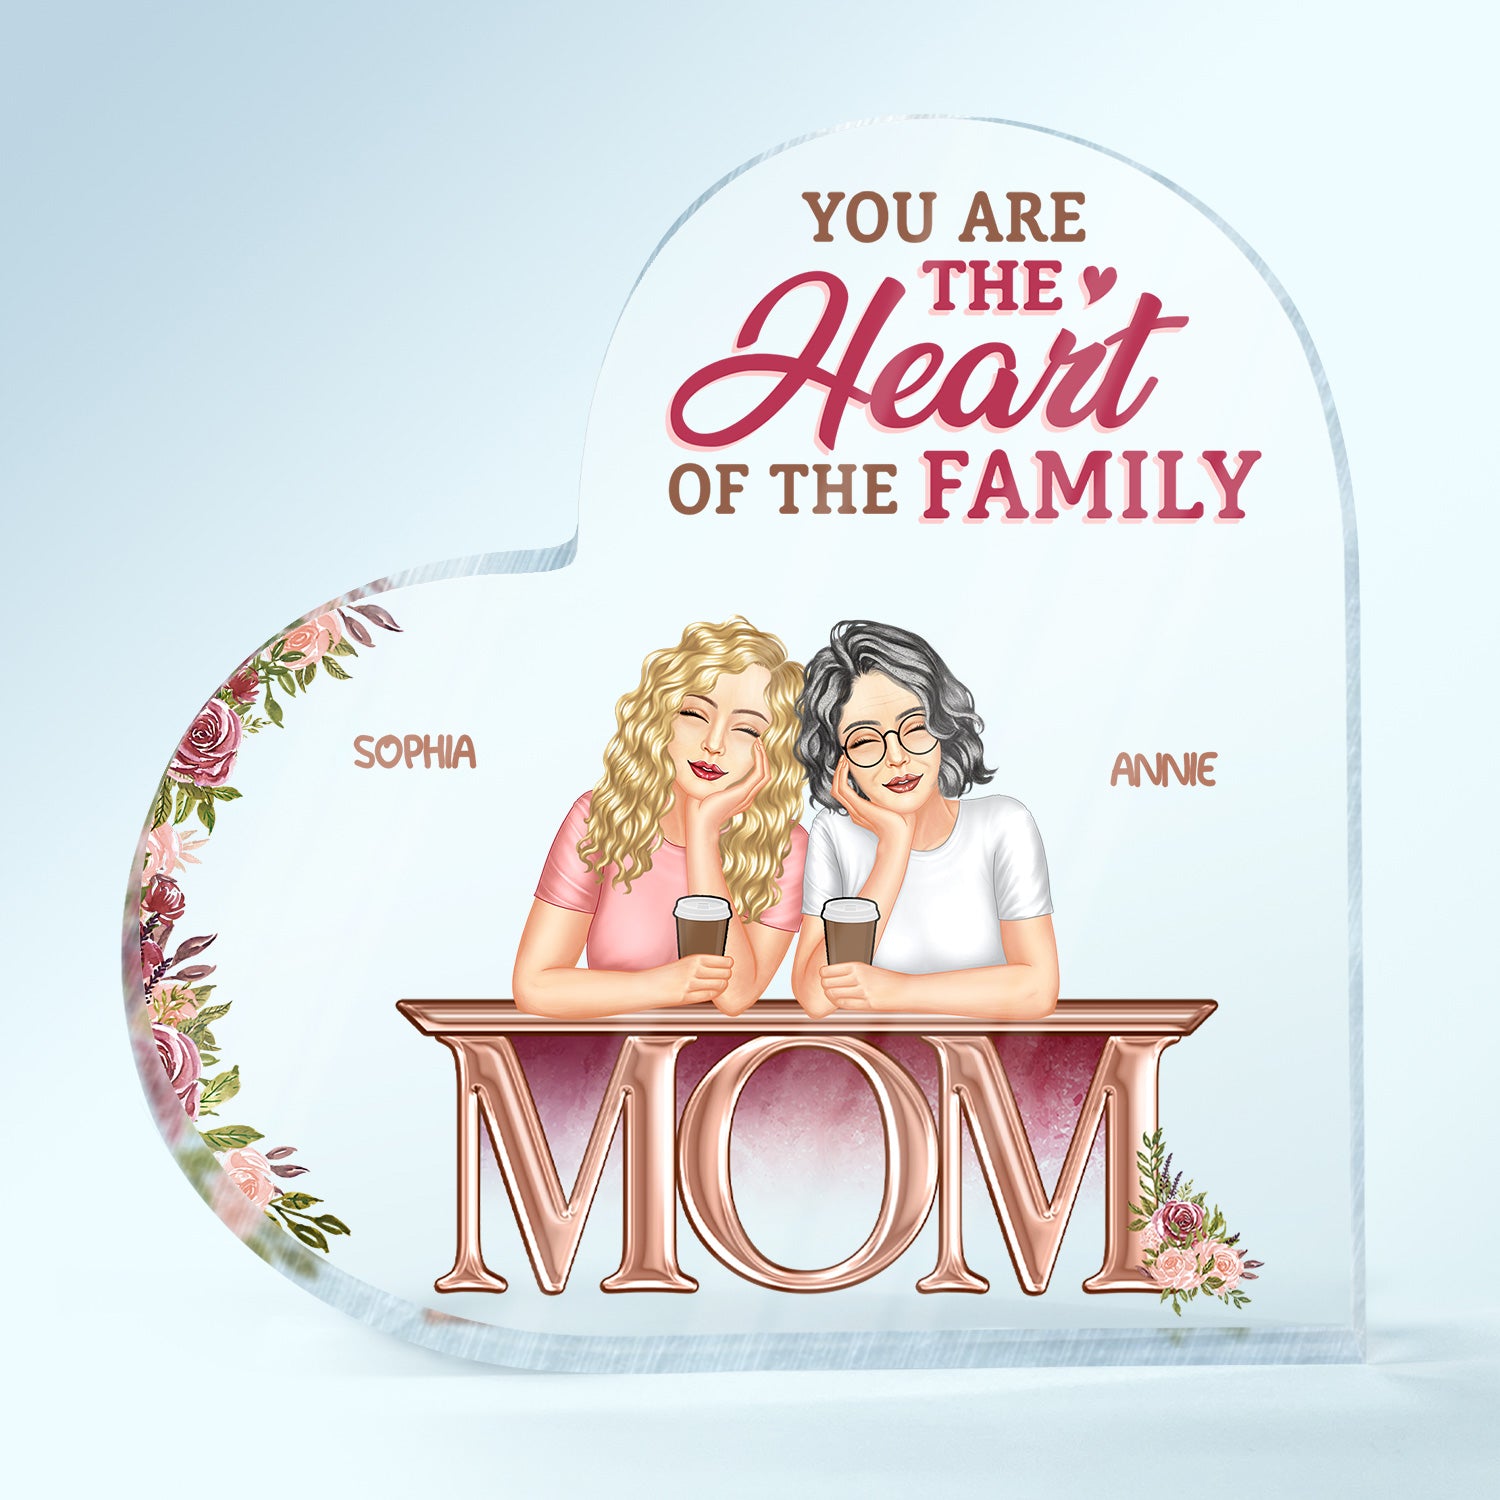 You Are The Heart Of The Family - Birthday, Loving Gift For Mom, Mother, Mama, Grandma, Grandmother - Personalized Custom Heart Shaped Acrylic Plaque